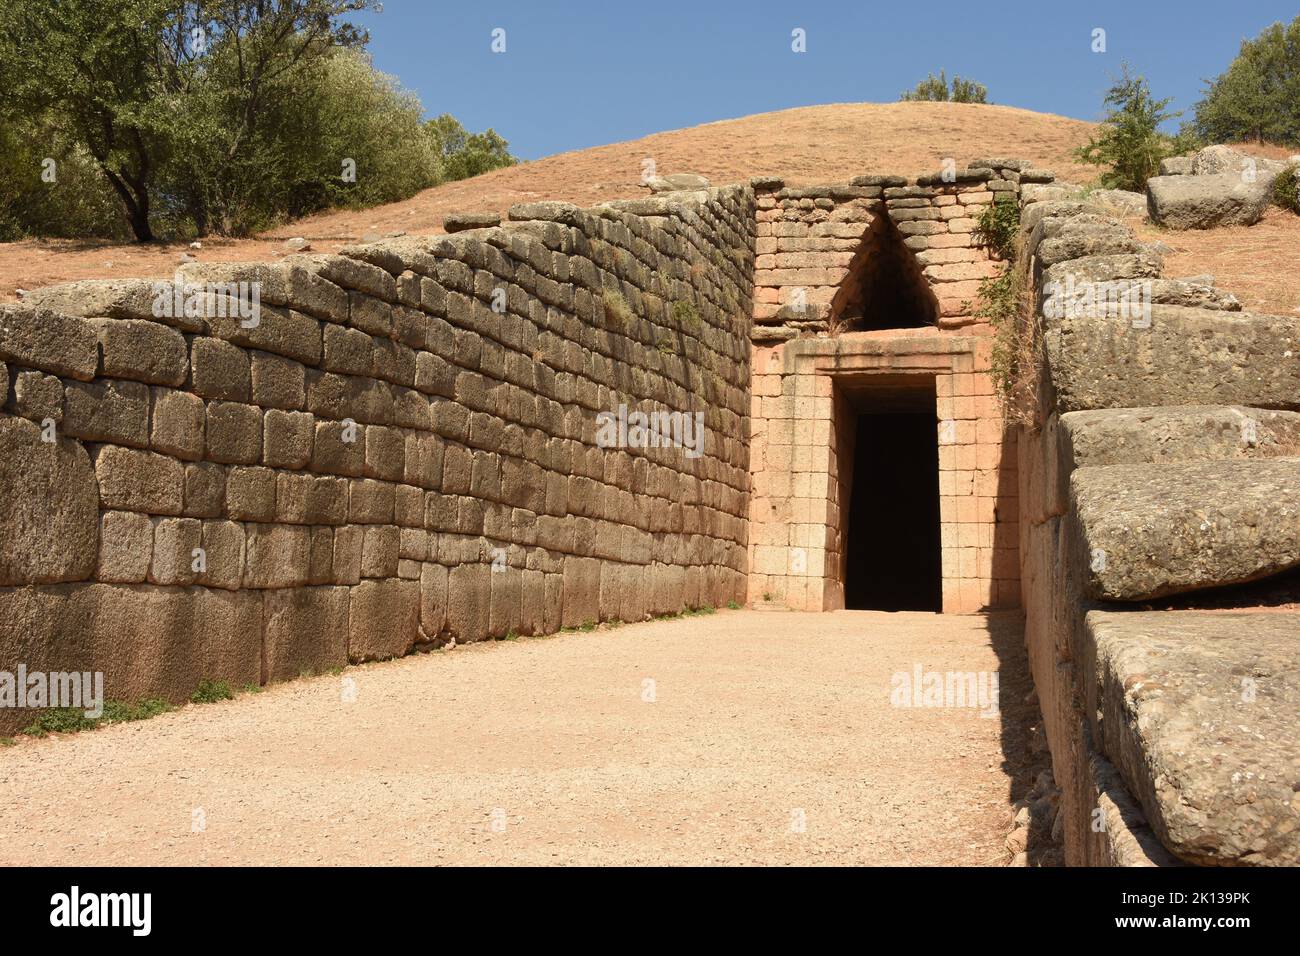 Approach to Tomb of Agamemnon (the Treasury of Atreus), beside ruins of Mycenae, UNESCO World Heritage Site, Mykines, Peleponnese, Greece, Europe Stock Photo